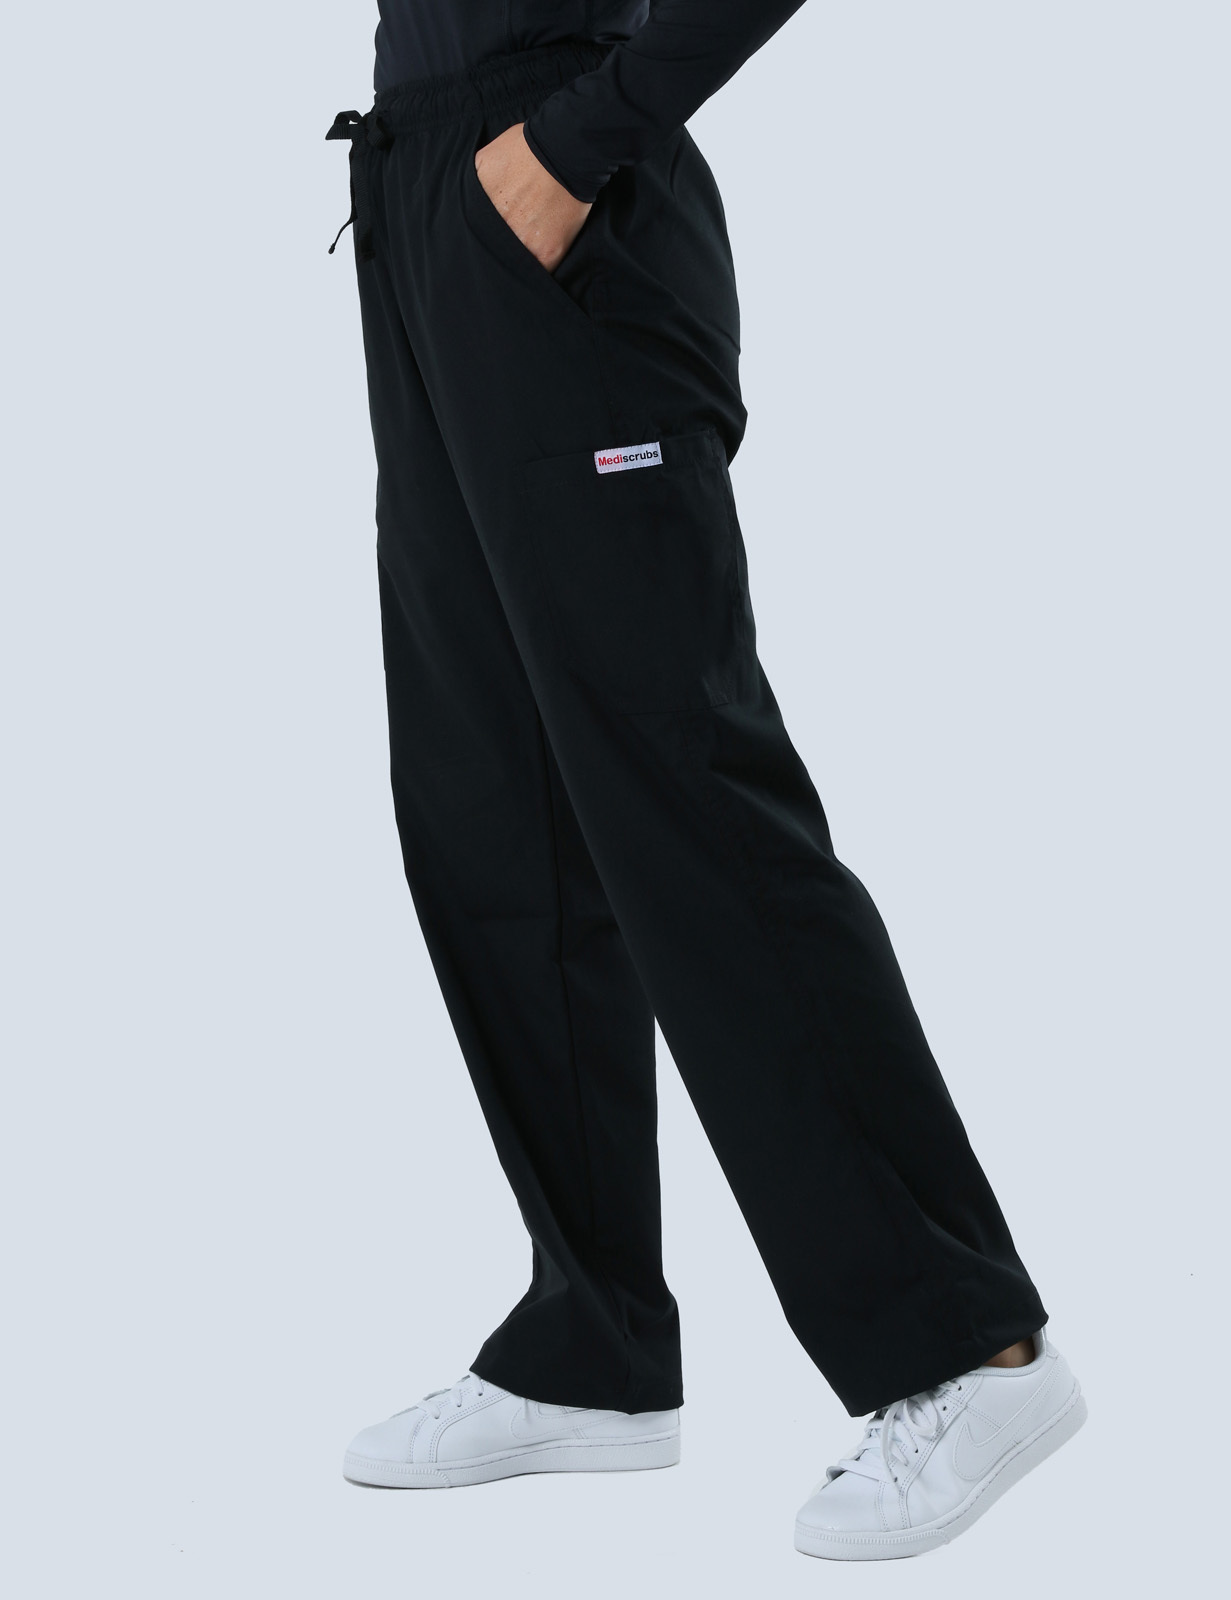 Holmesglen Private Hospital - ICC RN (4 Pocket Scrub Top and Cargo Pants in Black incl Logos)